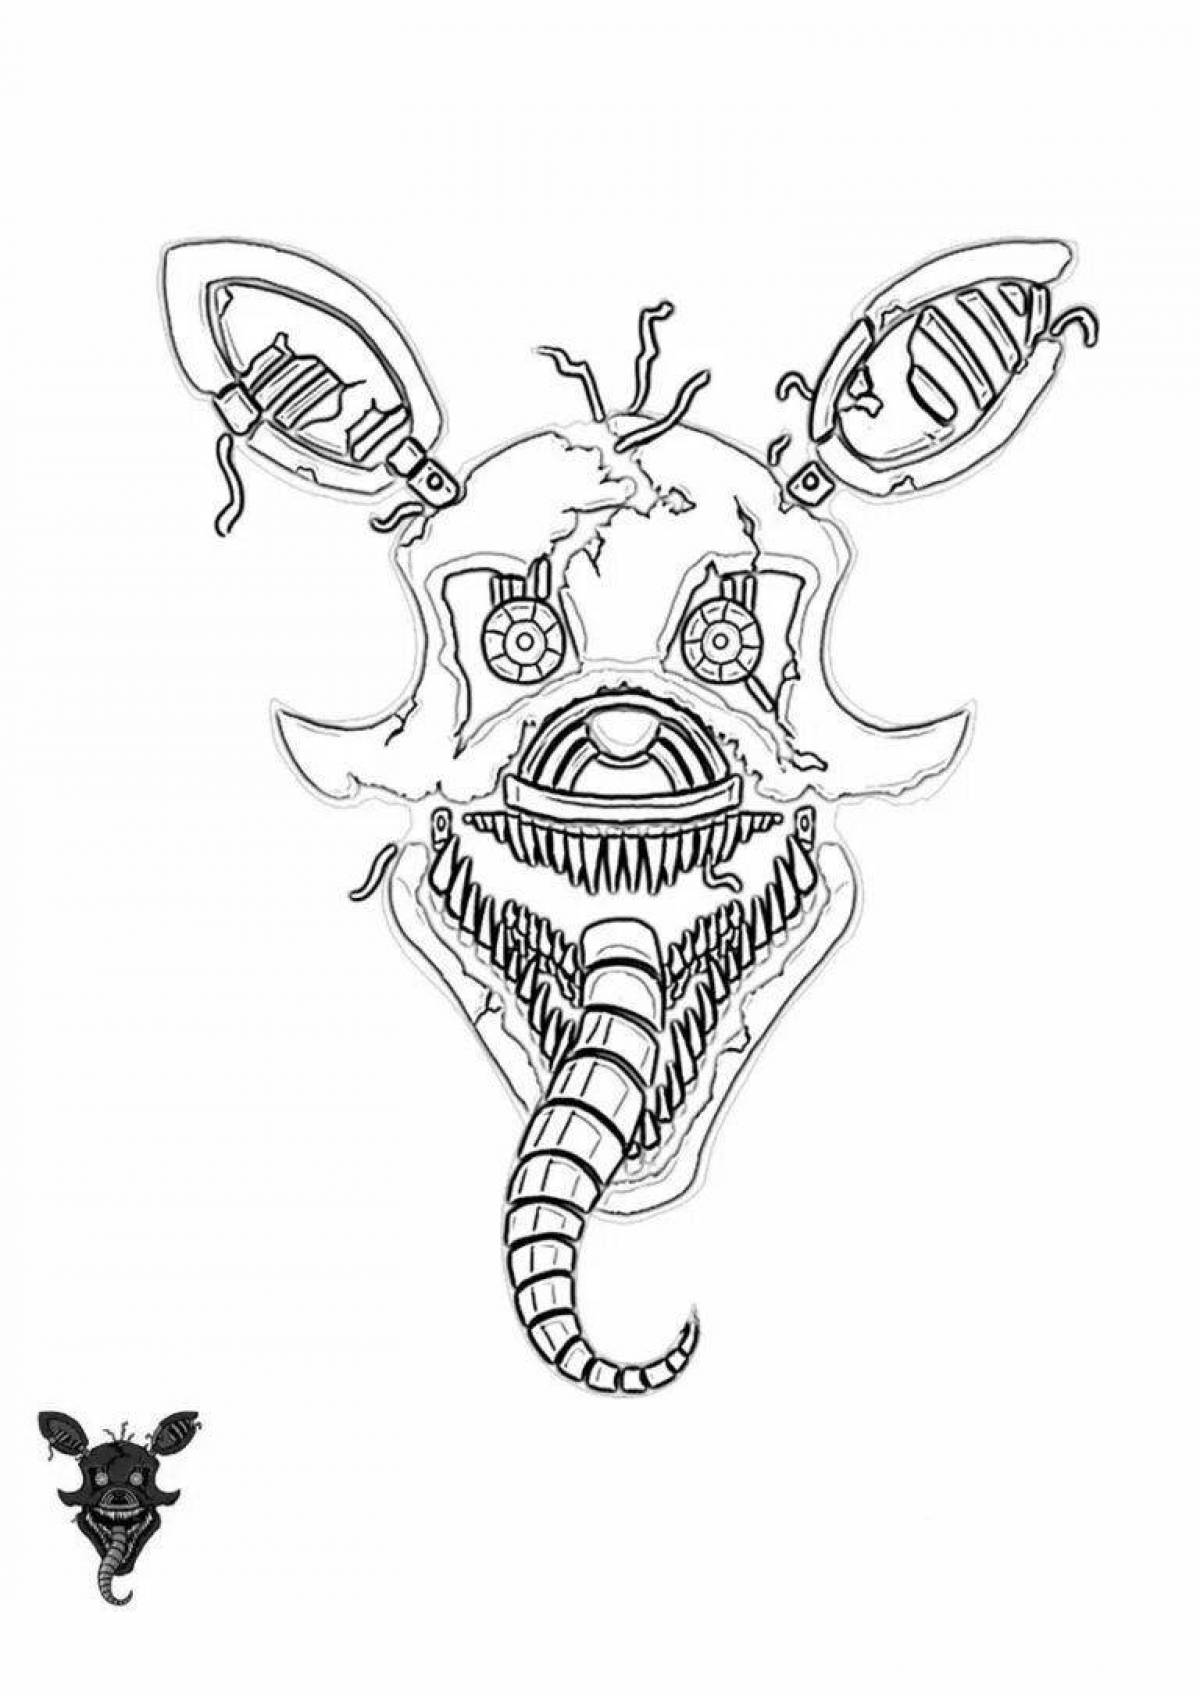 Awesome animatronics twisted coloring page